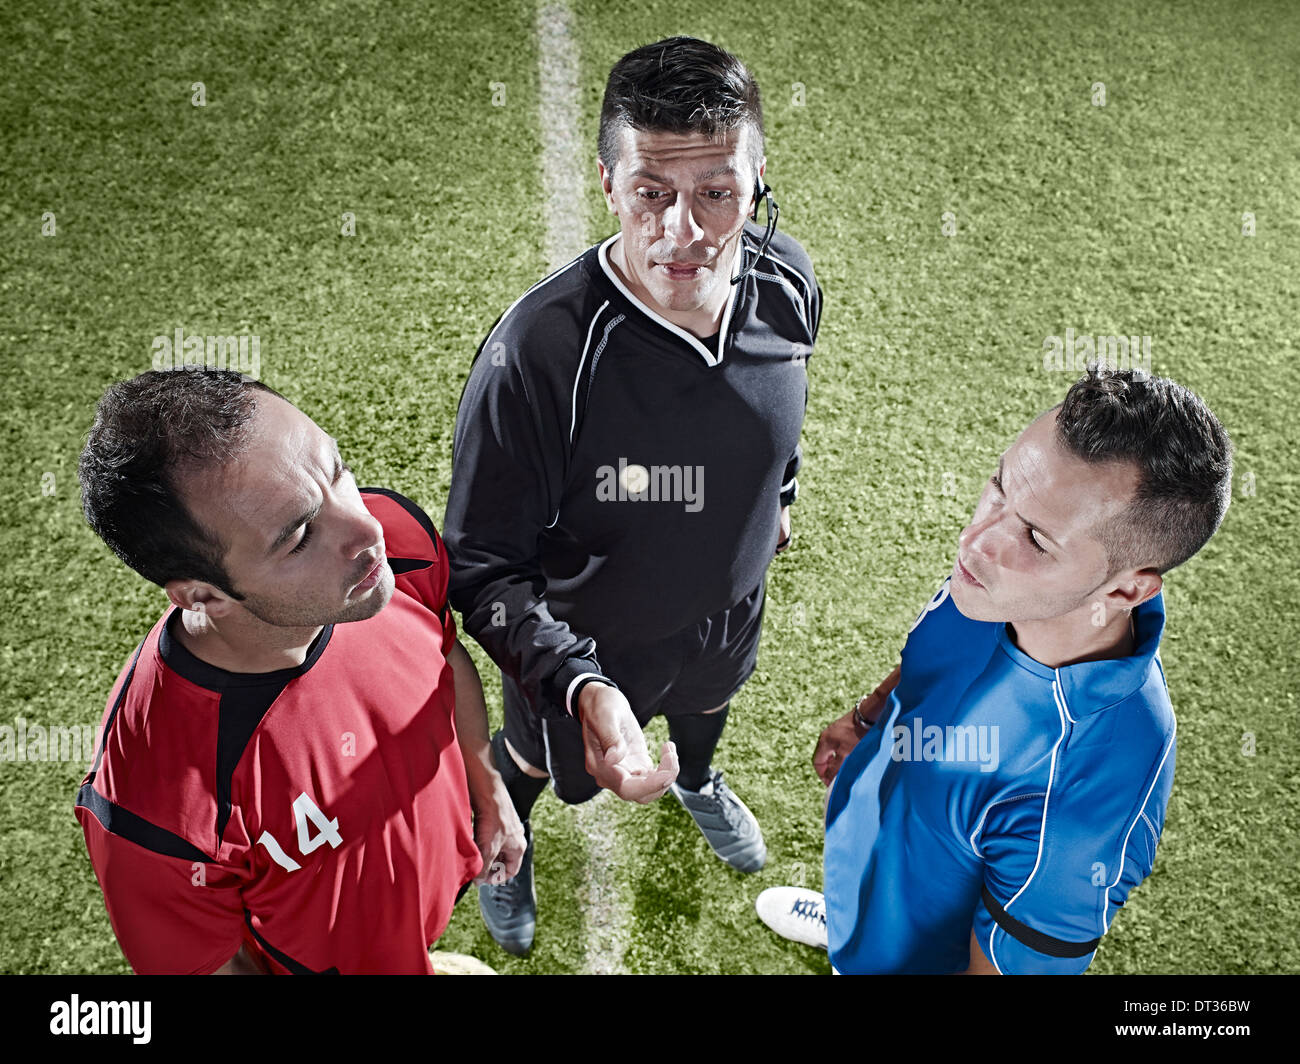 Soccer players facing each other on field Stock Photo